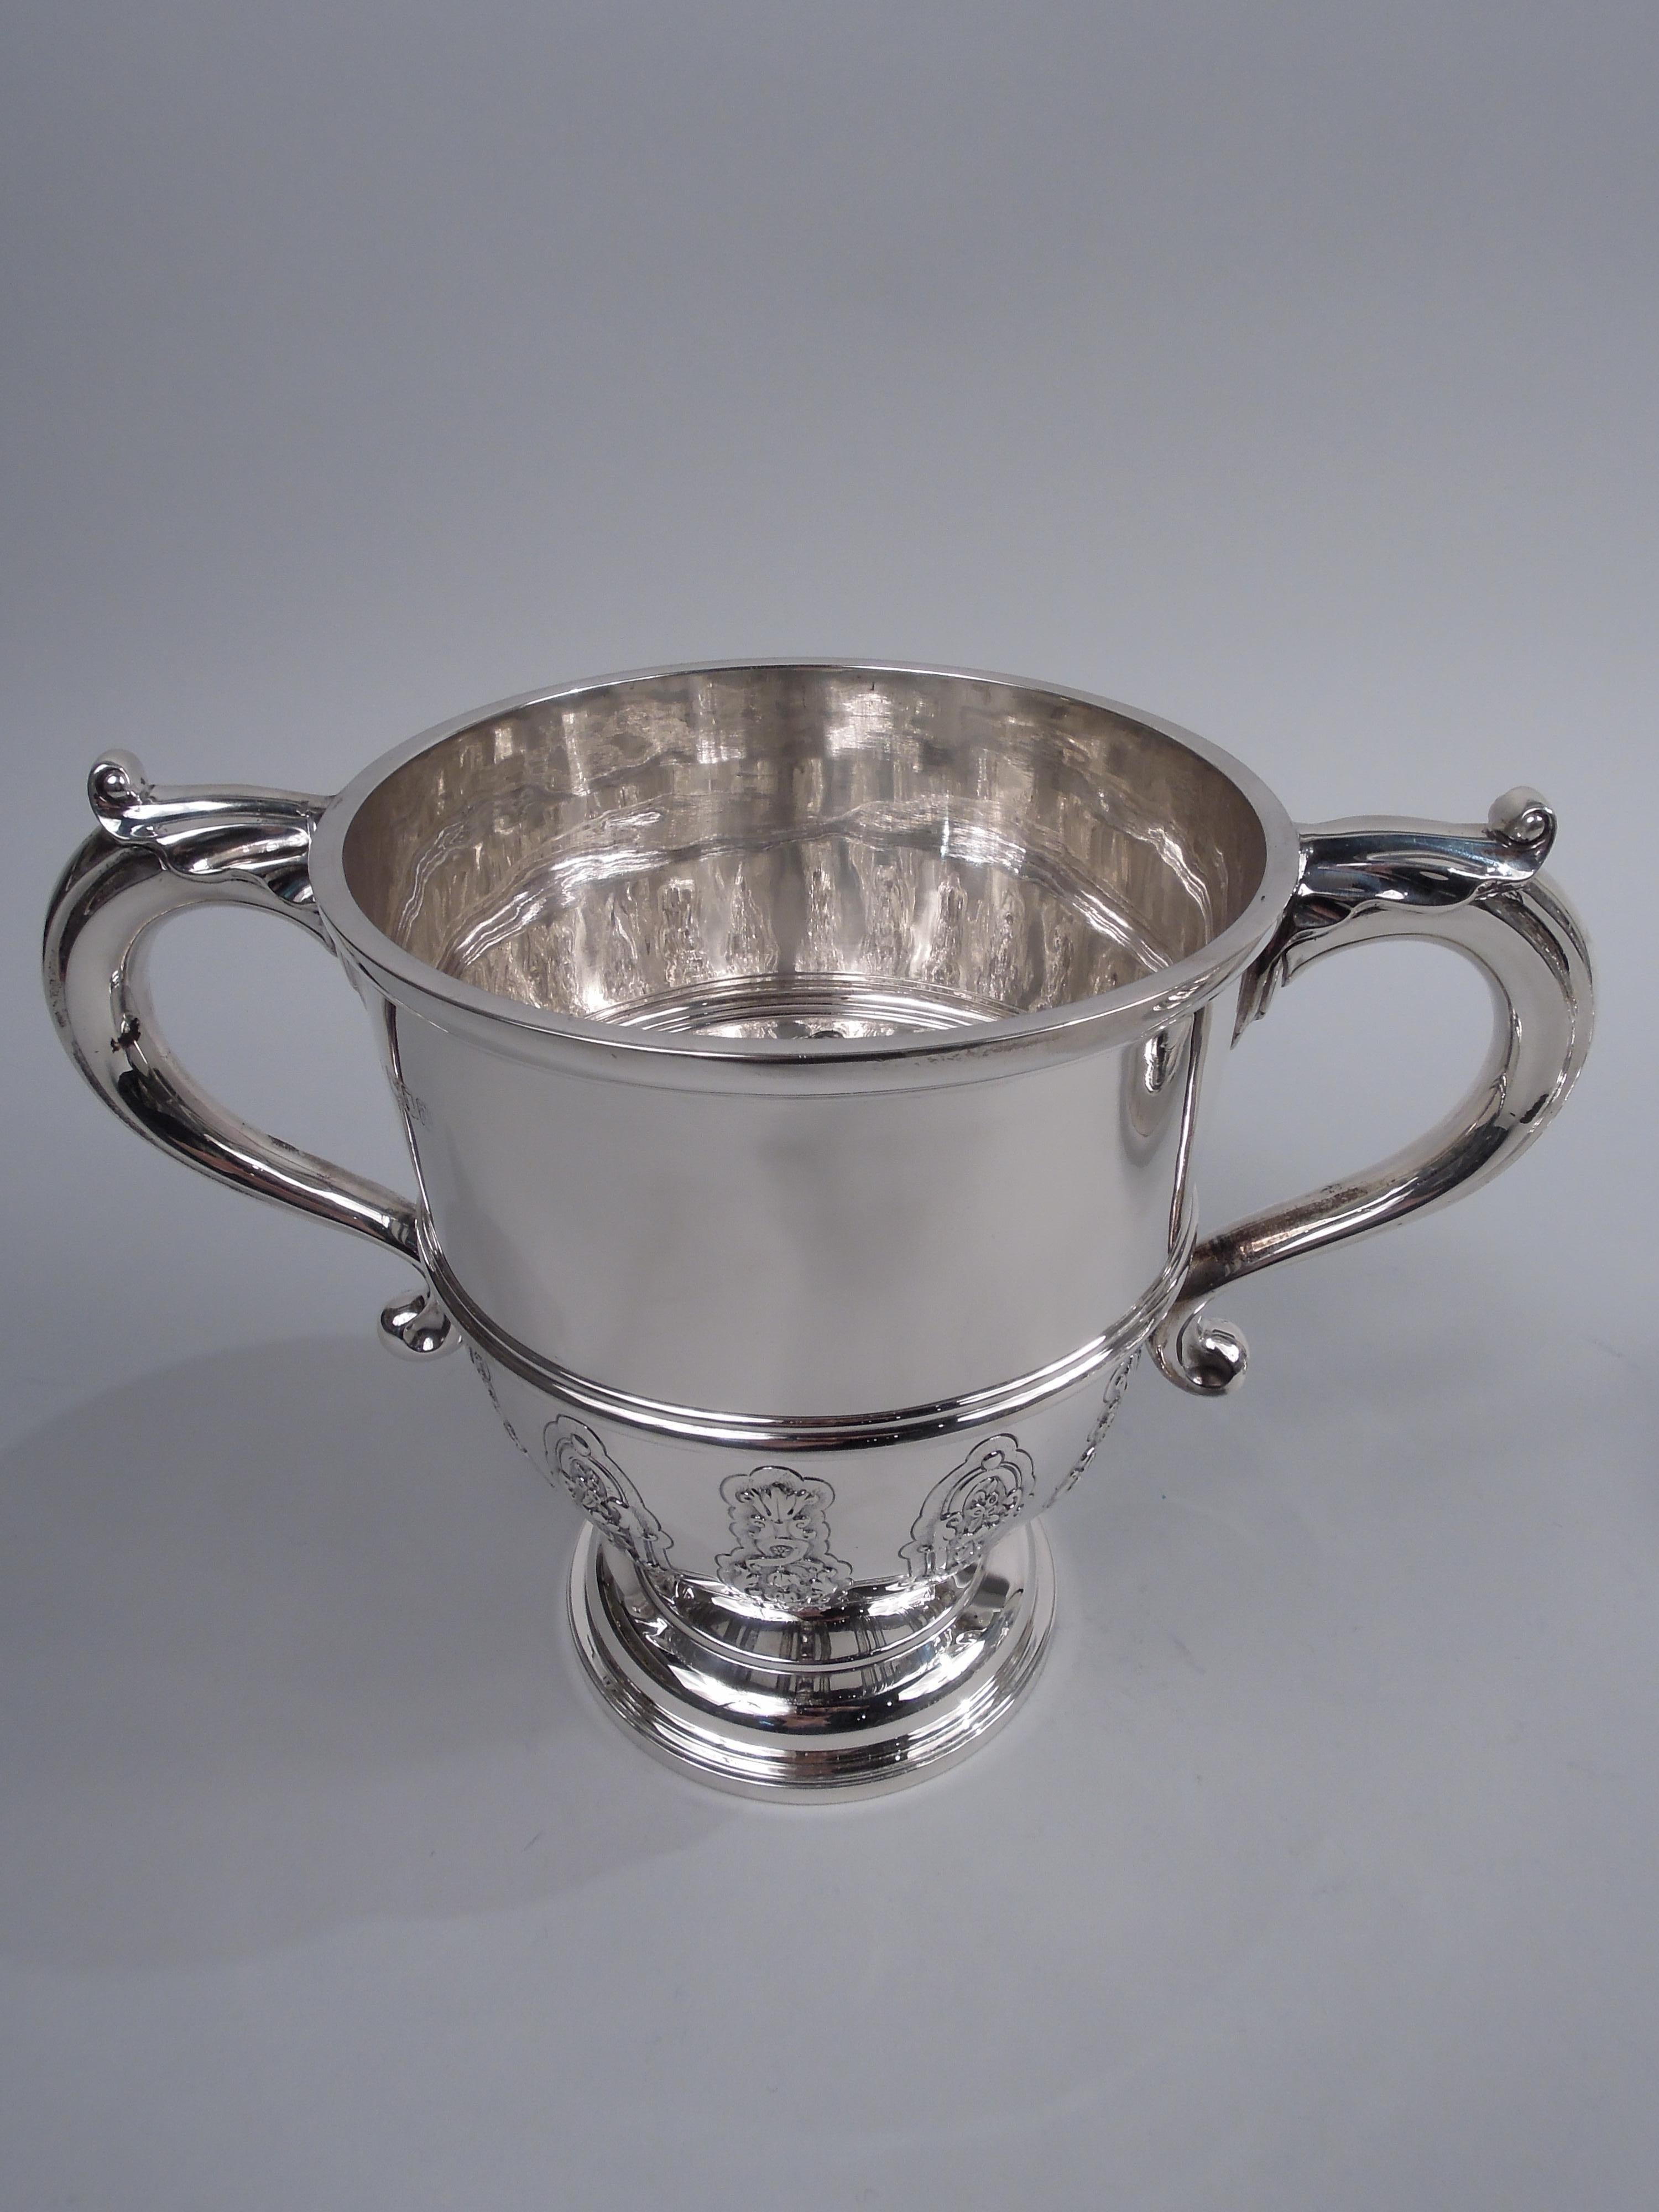 Crichton English Neoclassical Sterling Silver Covered Urn 1916 2